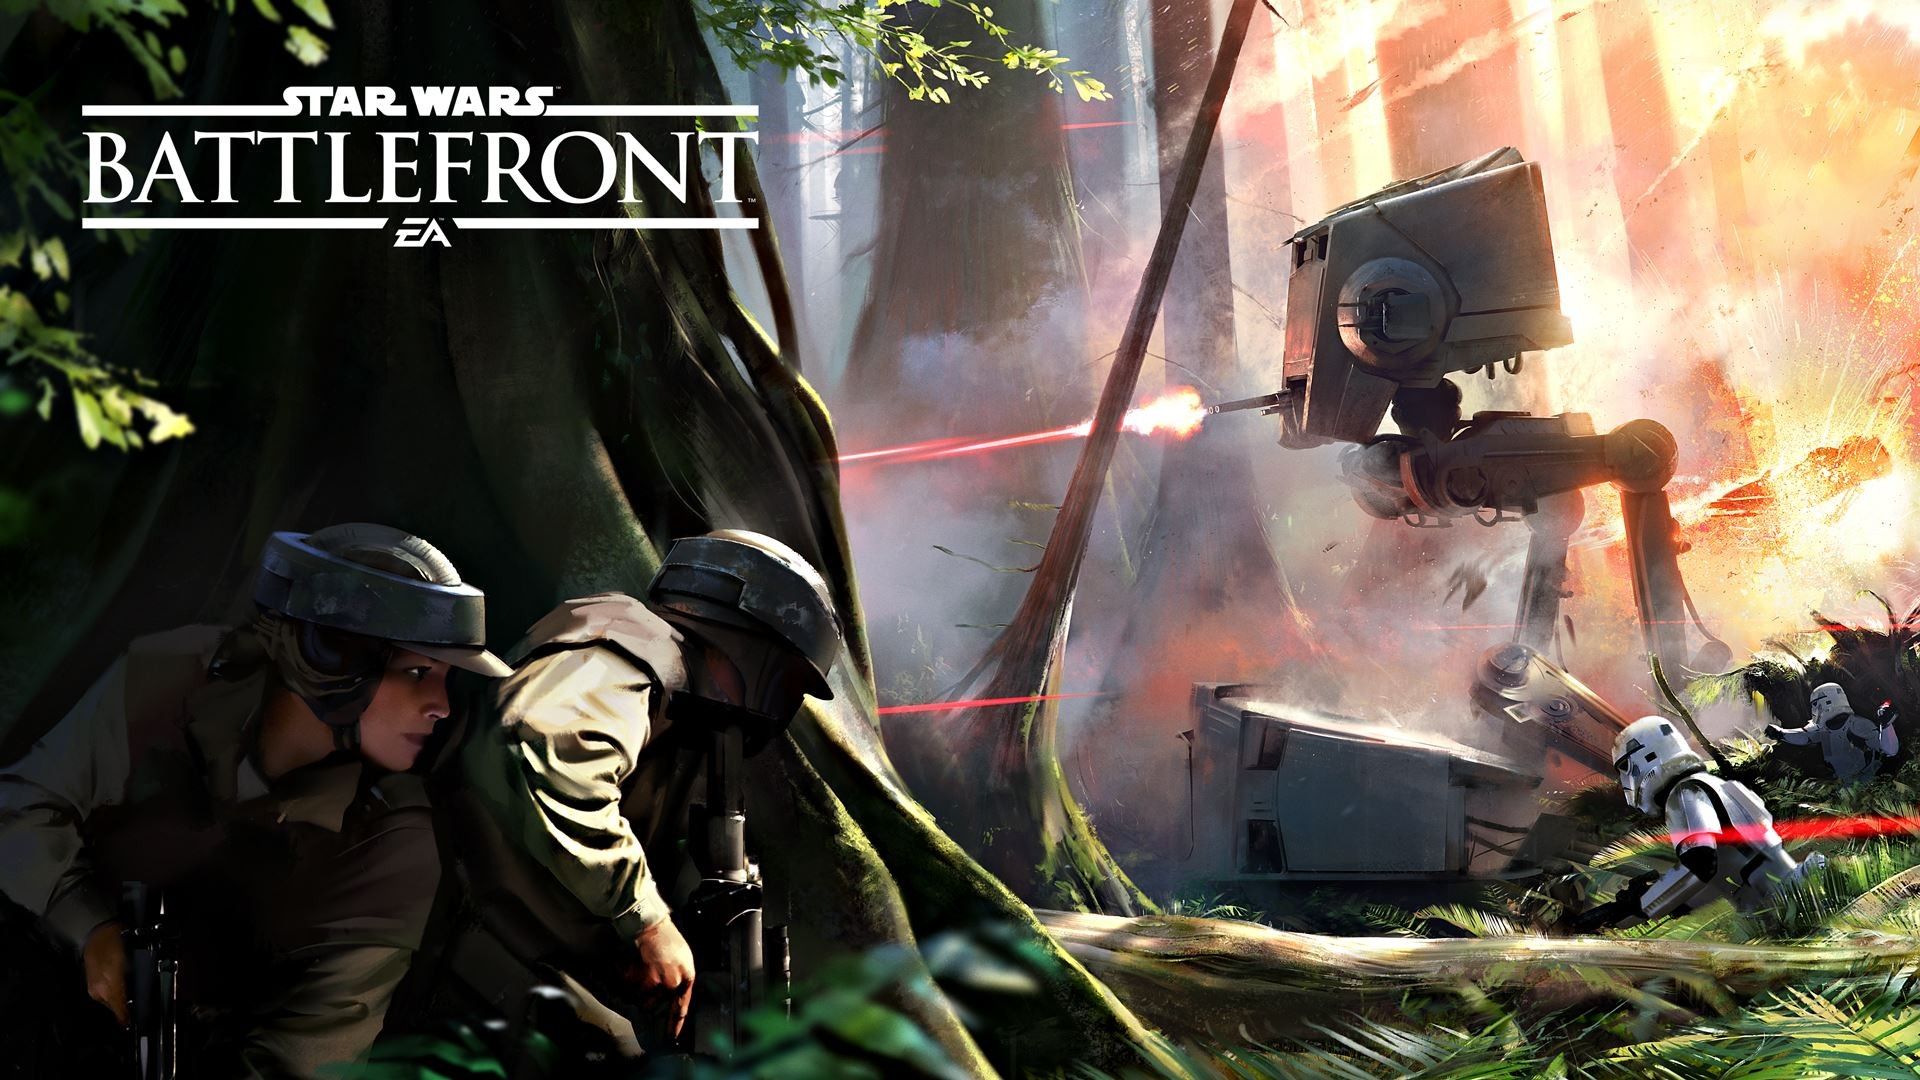 Wallpaper, Star Wars, soldier, stormtrooper, marines, Rebel Alliance, AT ST, Star Wars Battlefront, shooting, Battle of Endor, games, 1920x1080 px, computer wallpaper, pc game, infantry, militia, military organization, paintball equipment 1920x1080